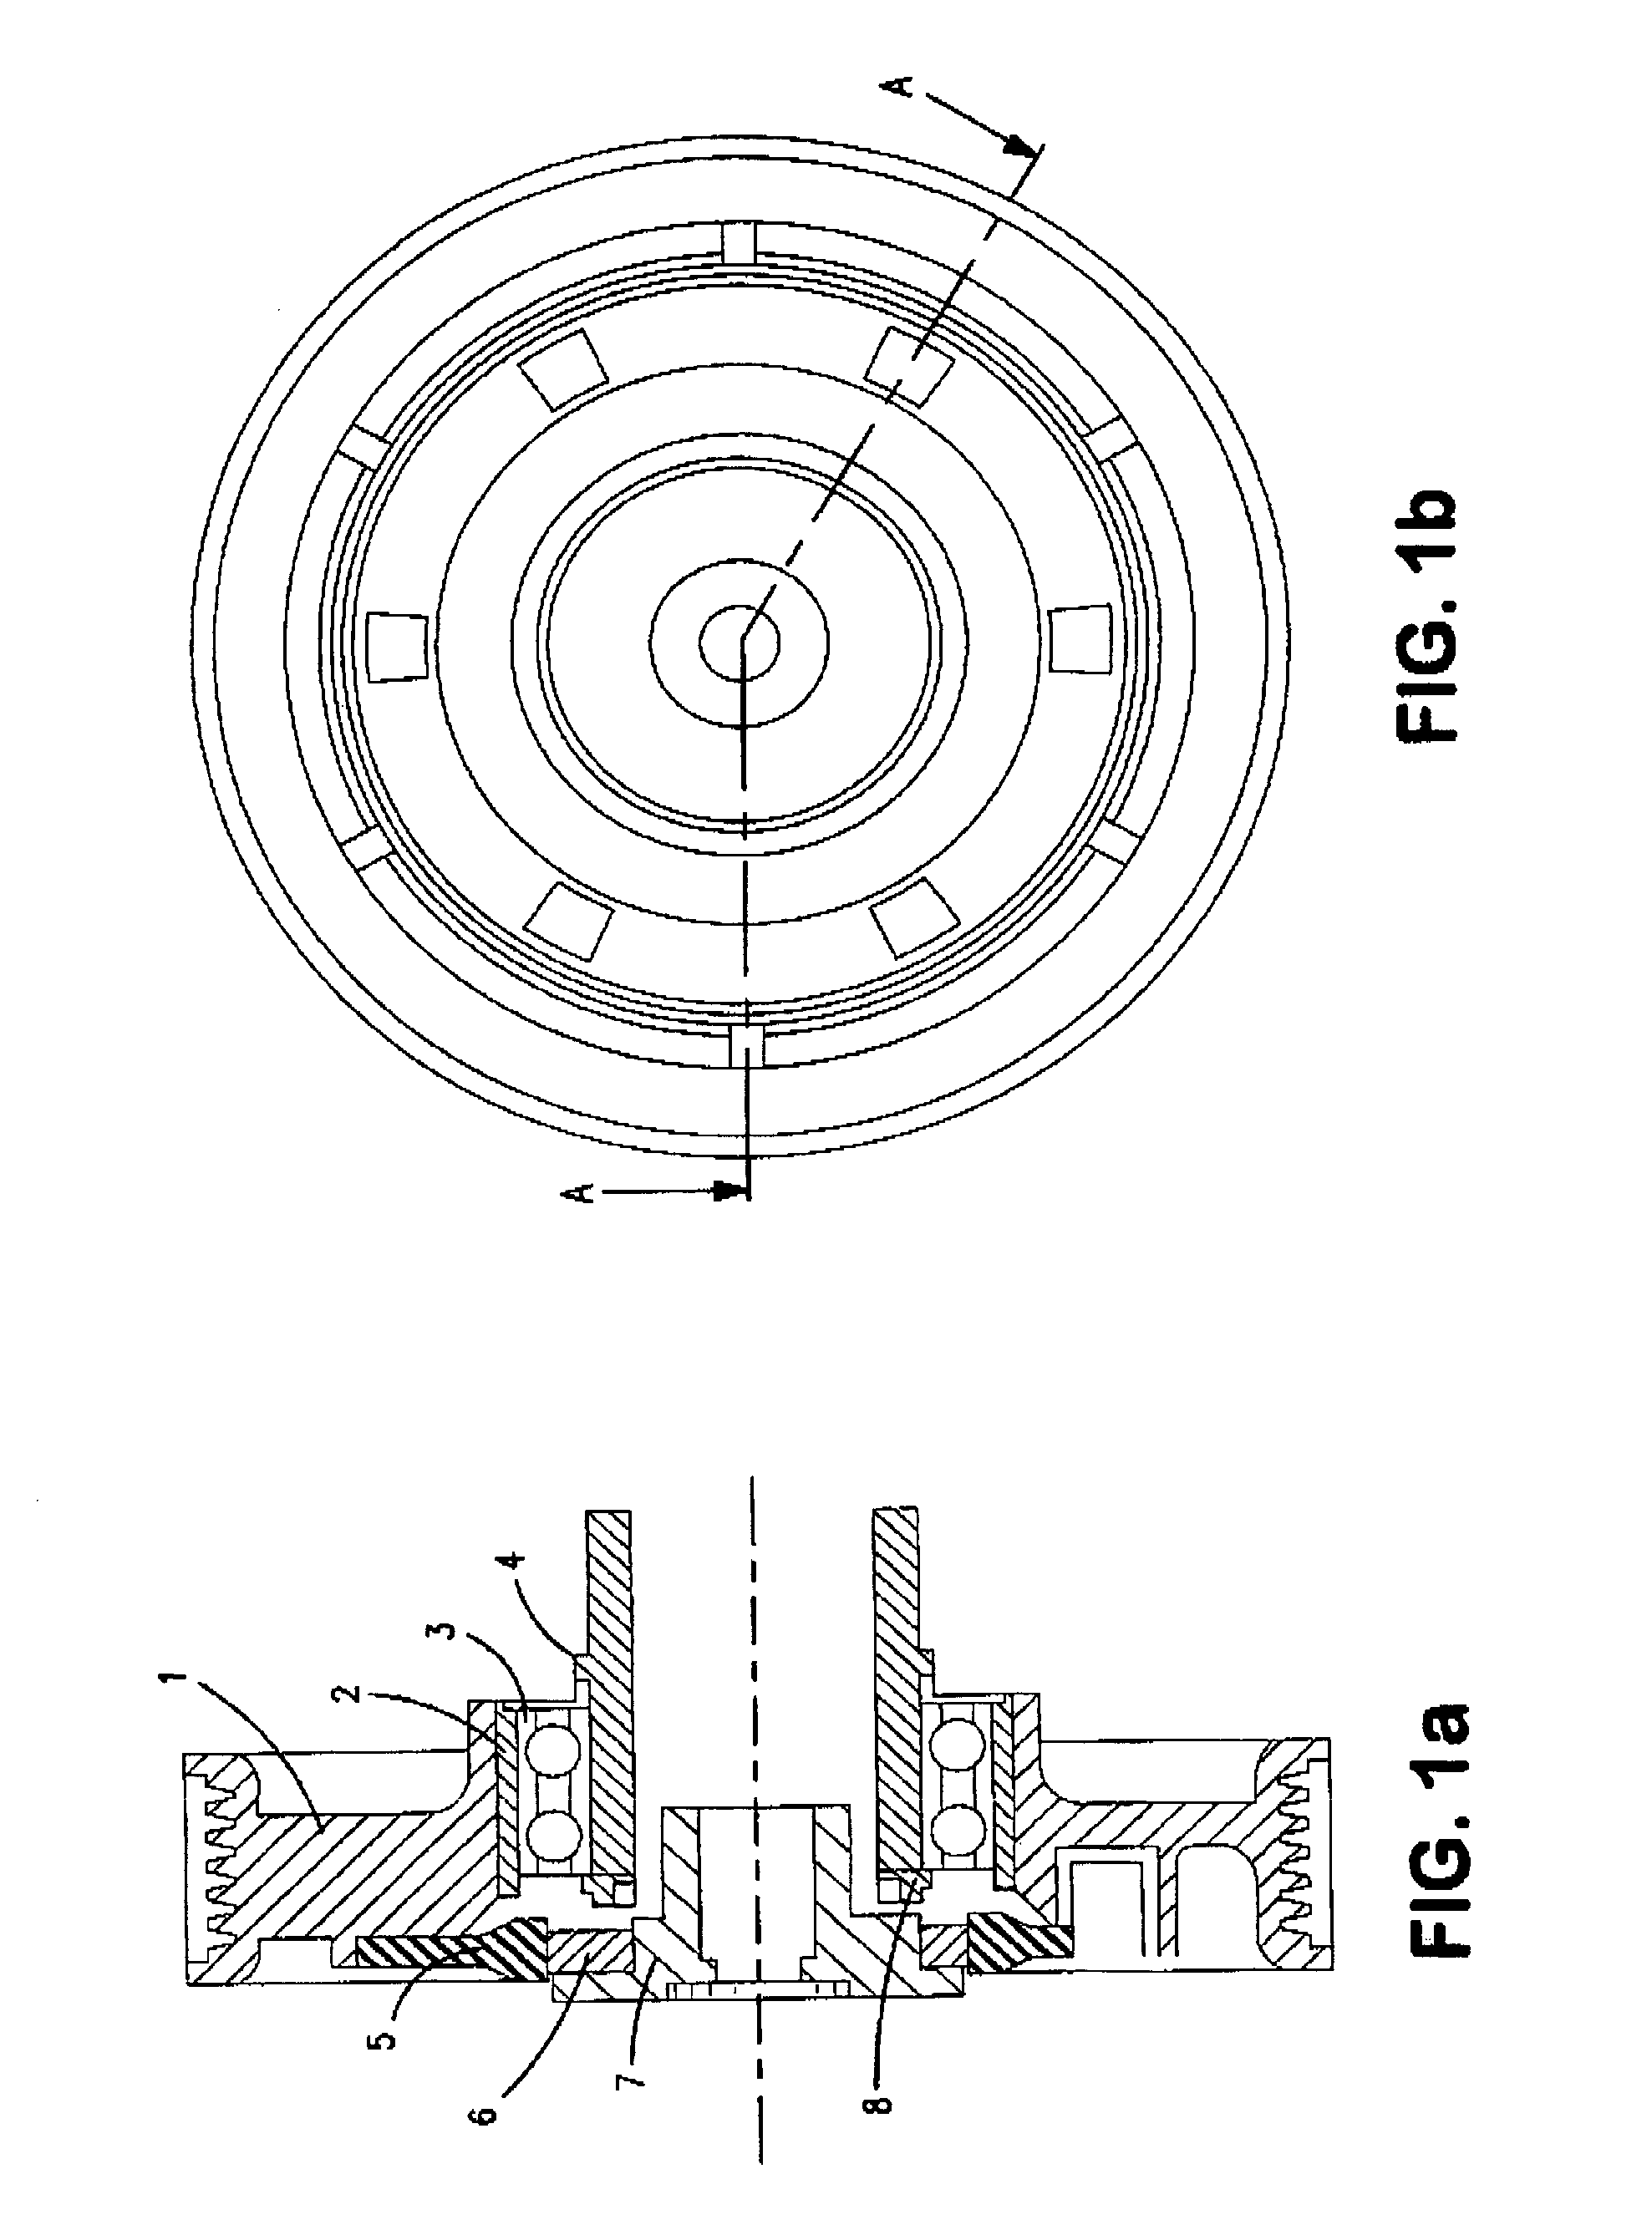 Apparatus for transmitting a torque from a motor to a compressor